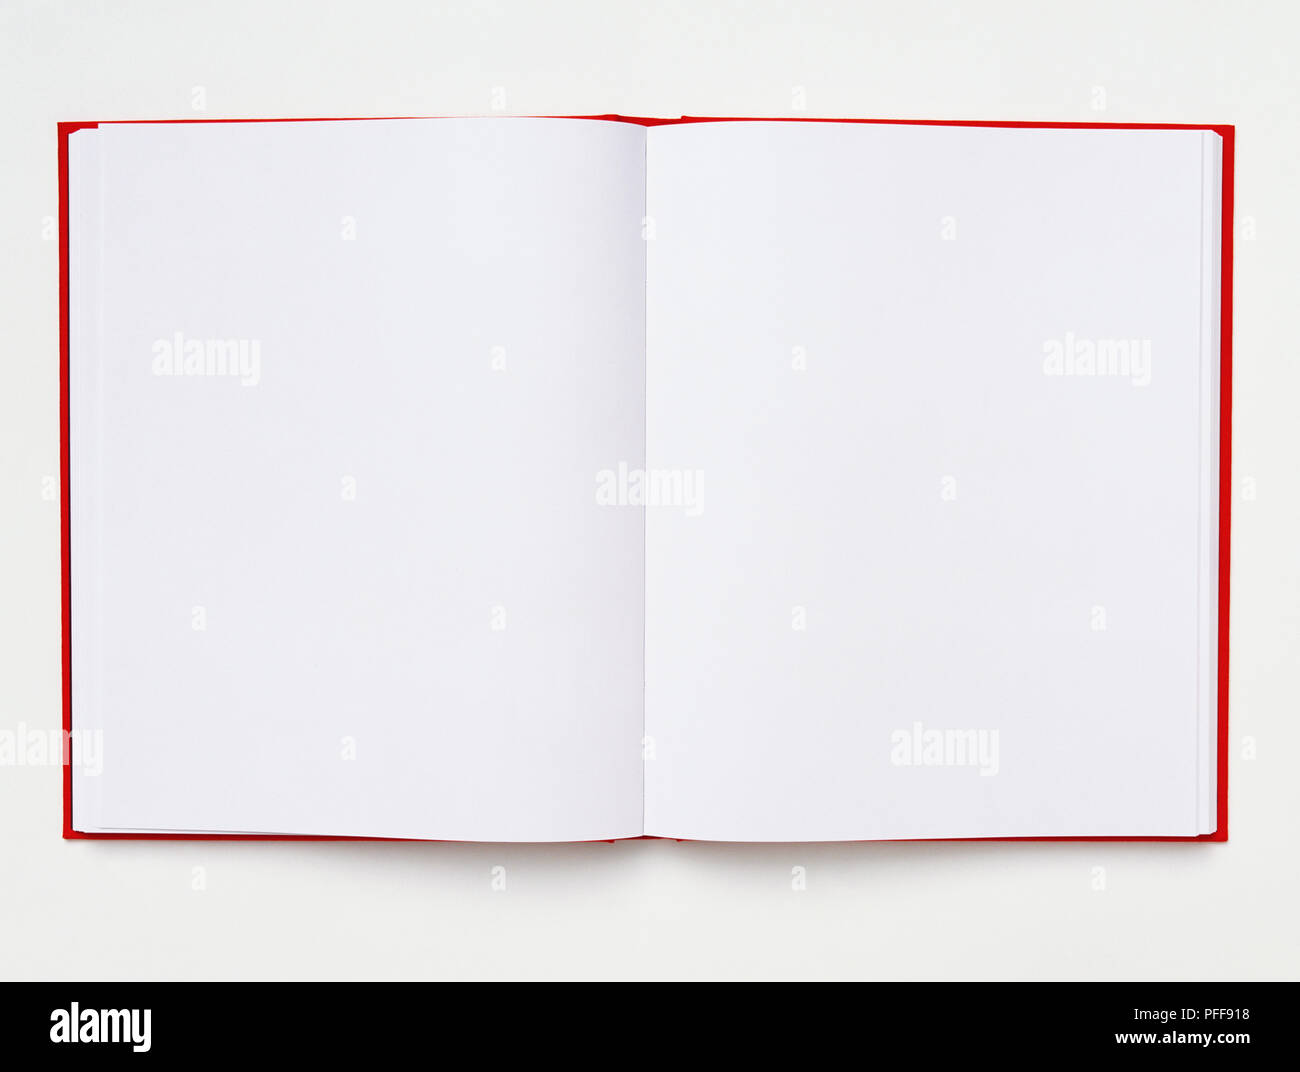 Open book with blank pages and red cover, close up Stock Photo